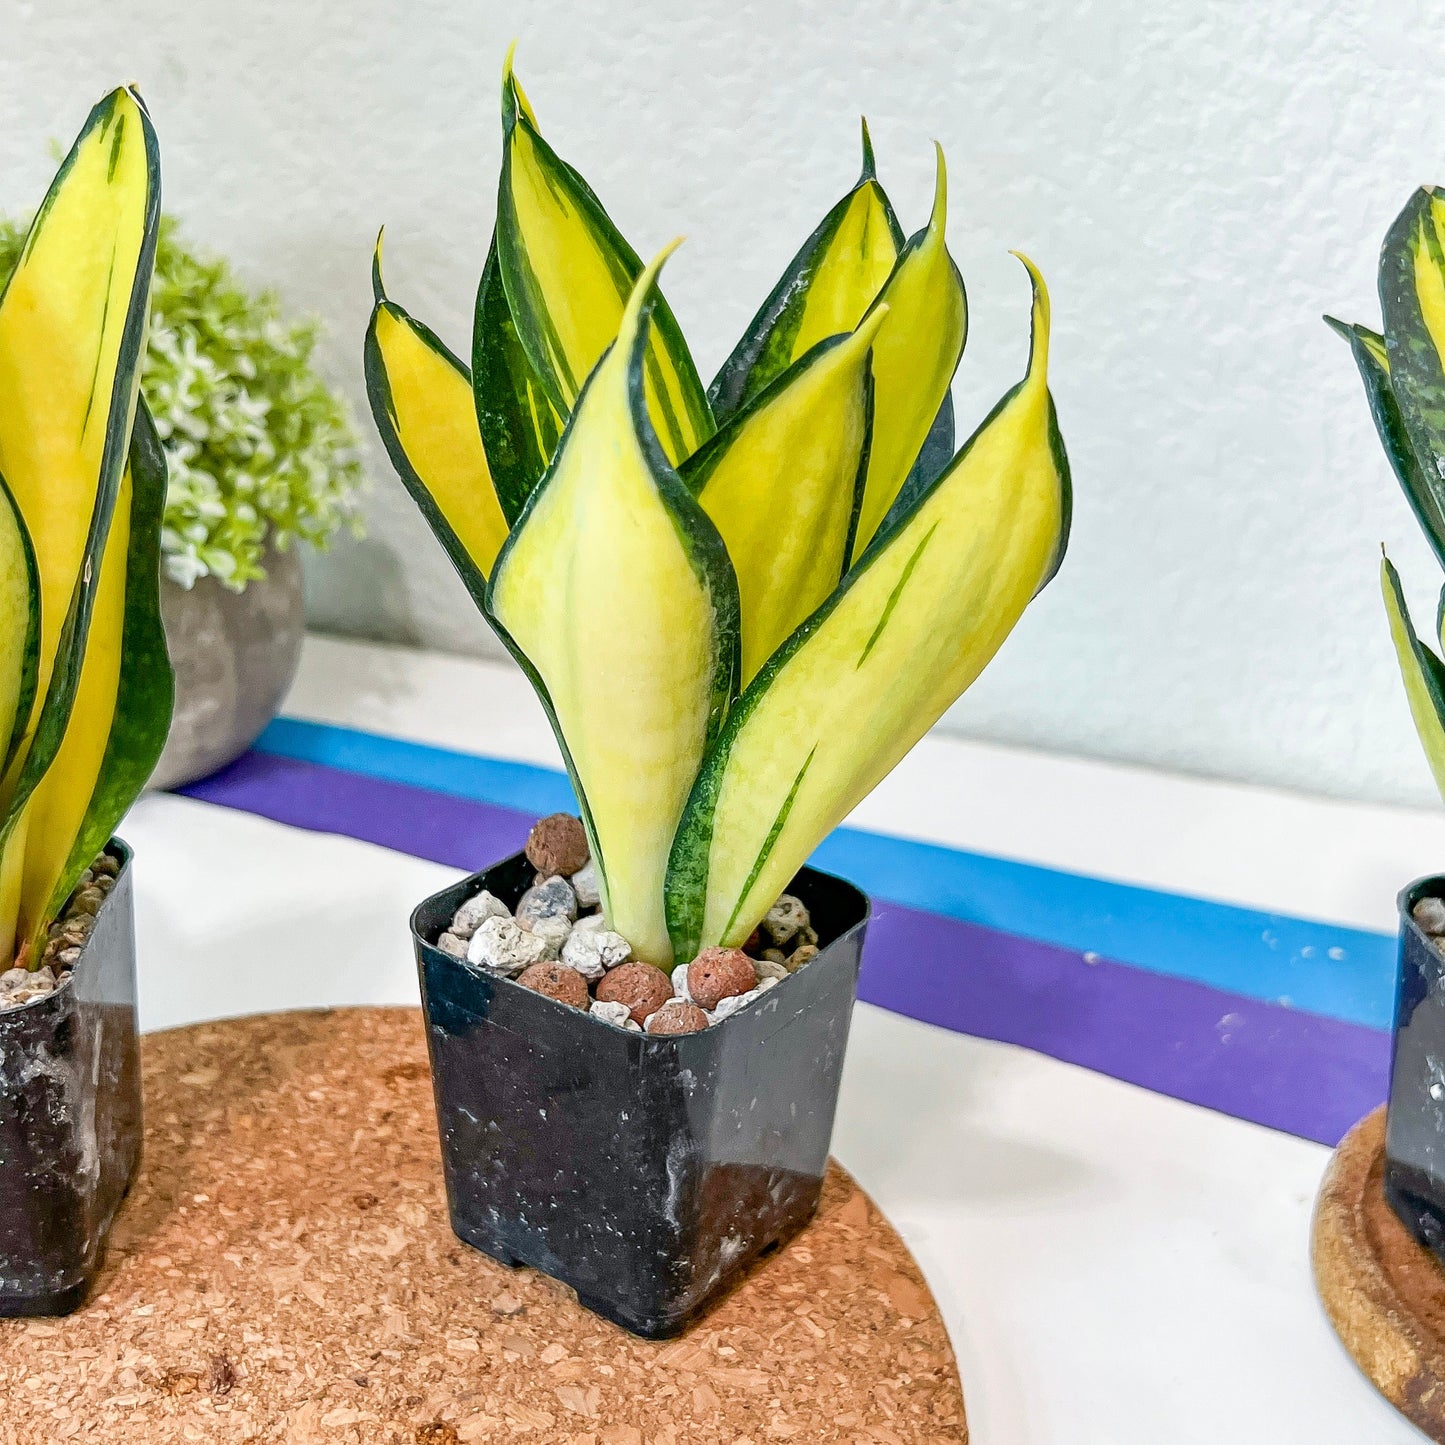 Sansevieria Hahnii solid gold (#RA36) | Imported Snake Plants | 2" Pot